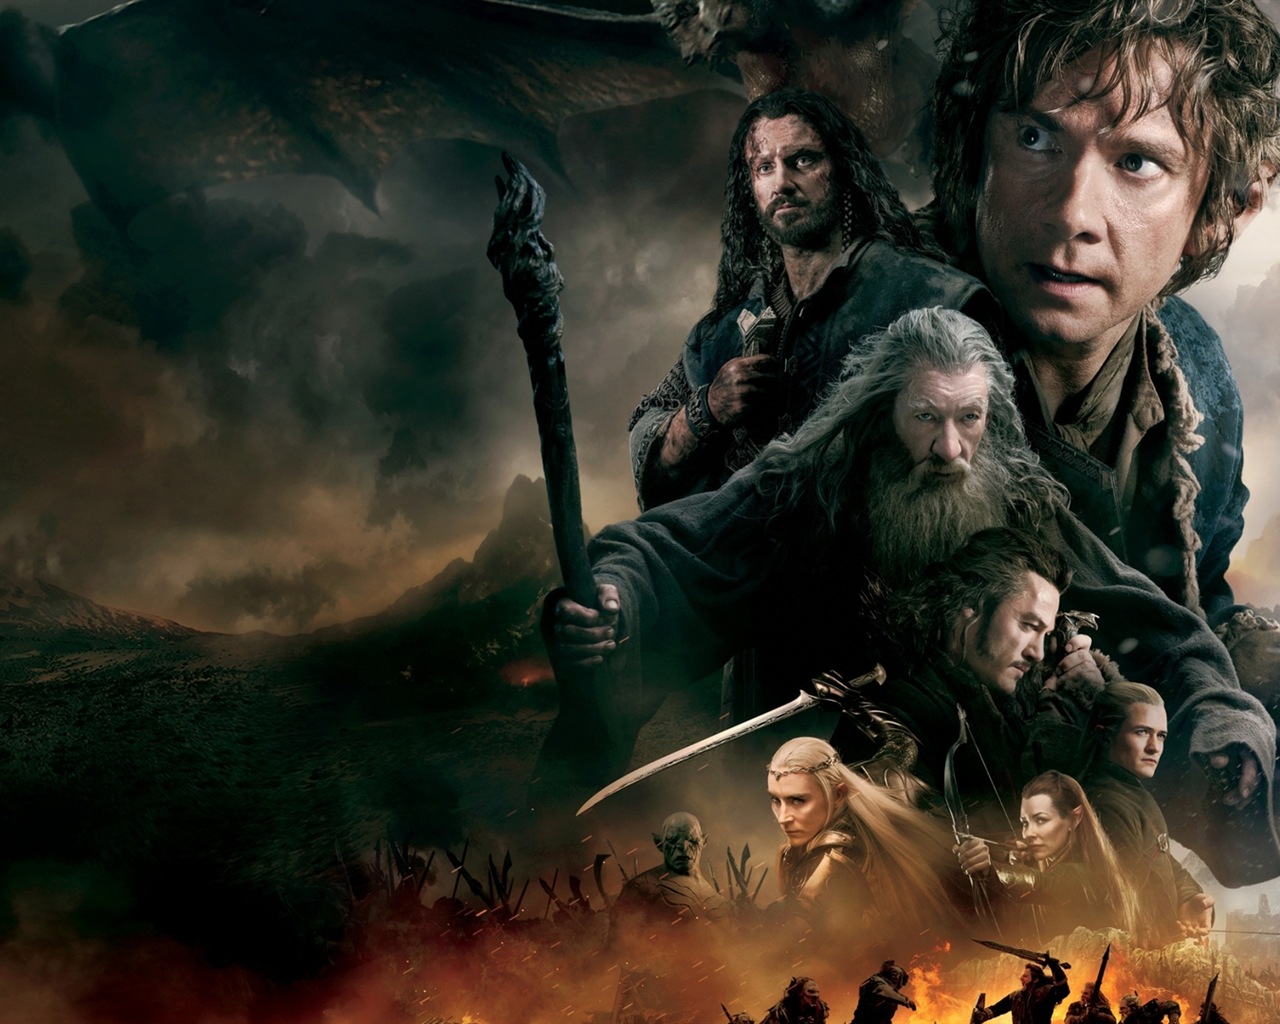 The Hobbit: The Battle of the Five Armies, movie HD wallpapers #10 - 1280x1024